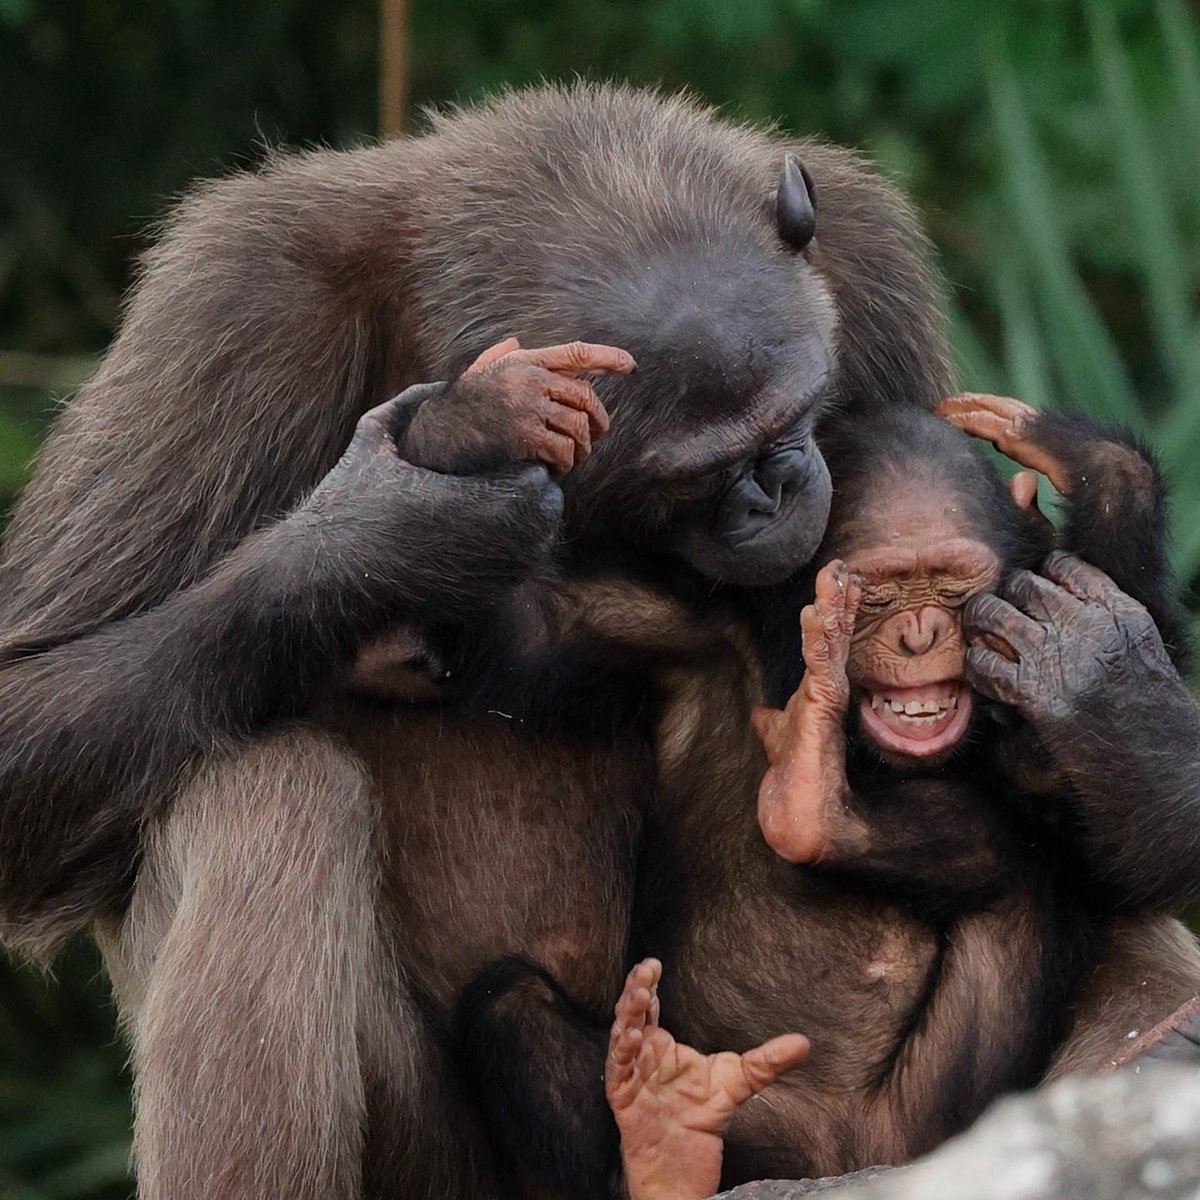 Tickle time! 🙊 Chimpanzees can communicate and tease each other through tickling. This causes chimpanzees to laugh, meaning that tickling may be the evolutionary root of human laughter as well as our sense of humour. #EarthCapture by Ramesh S. Krishnamurthy via Instagram